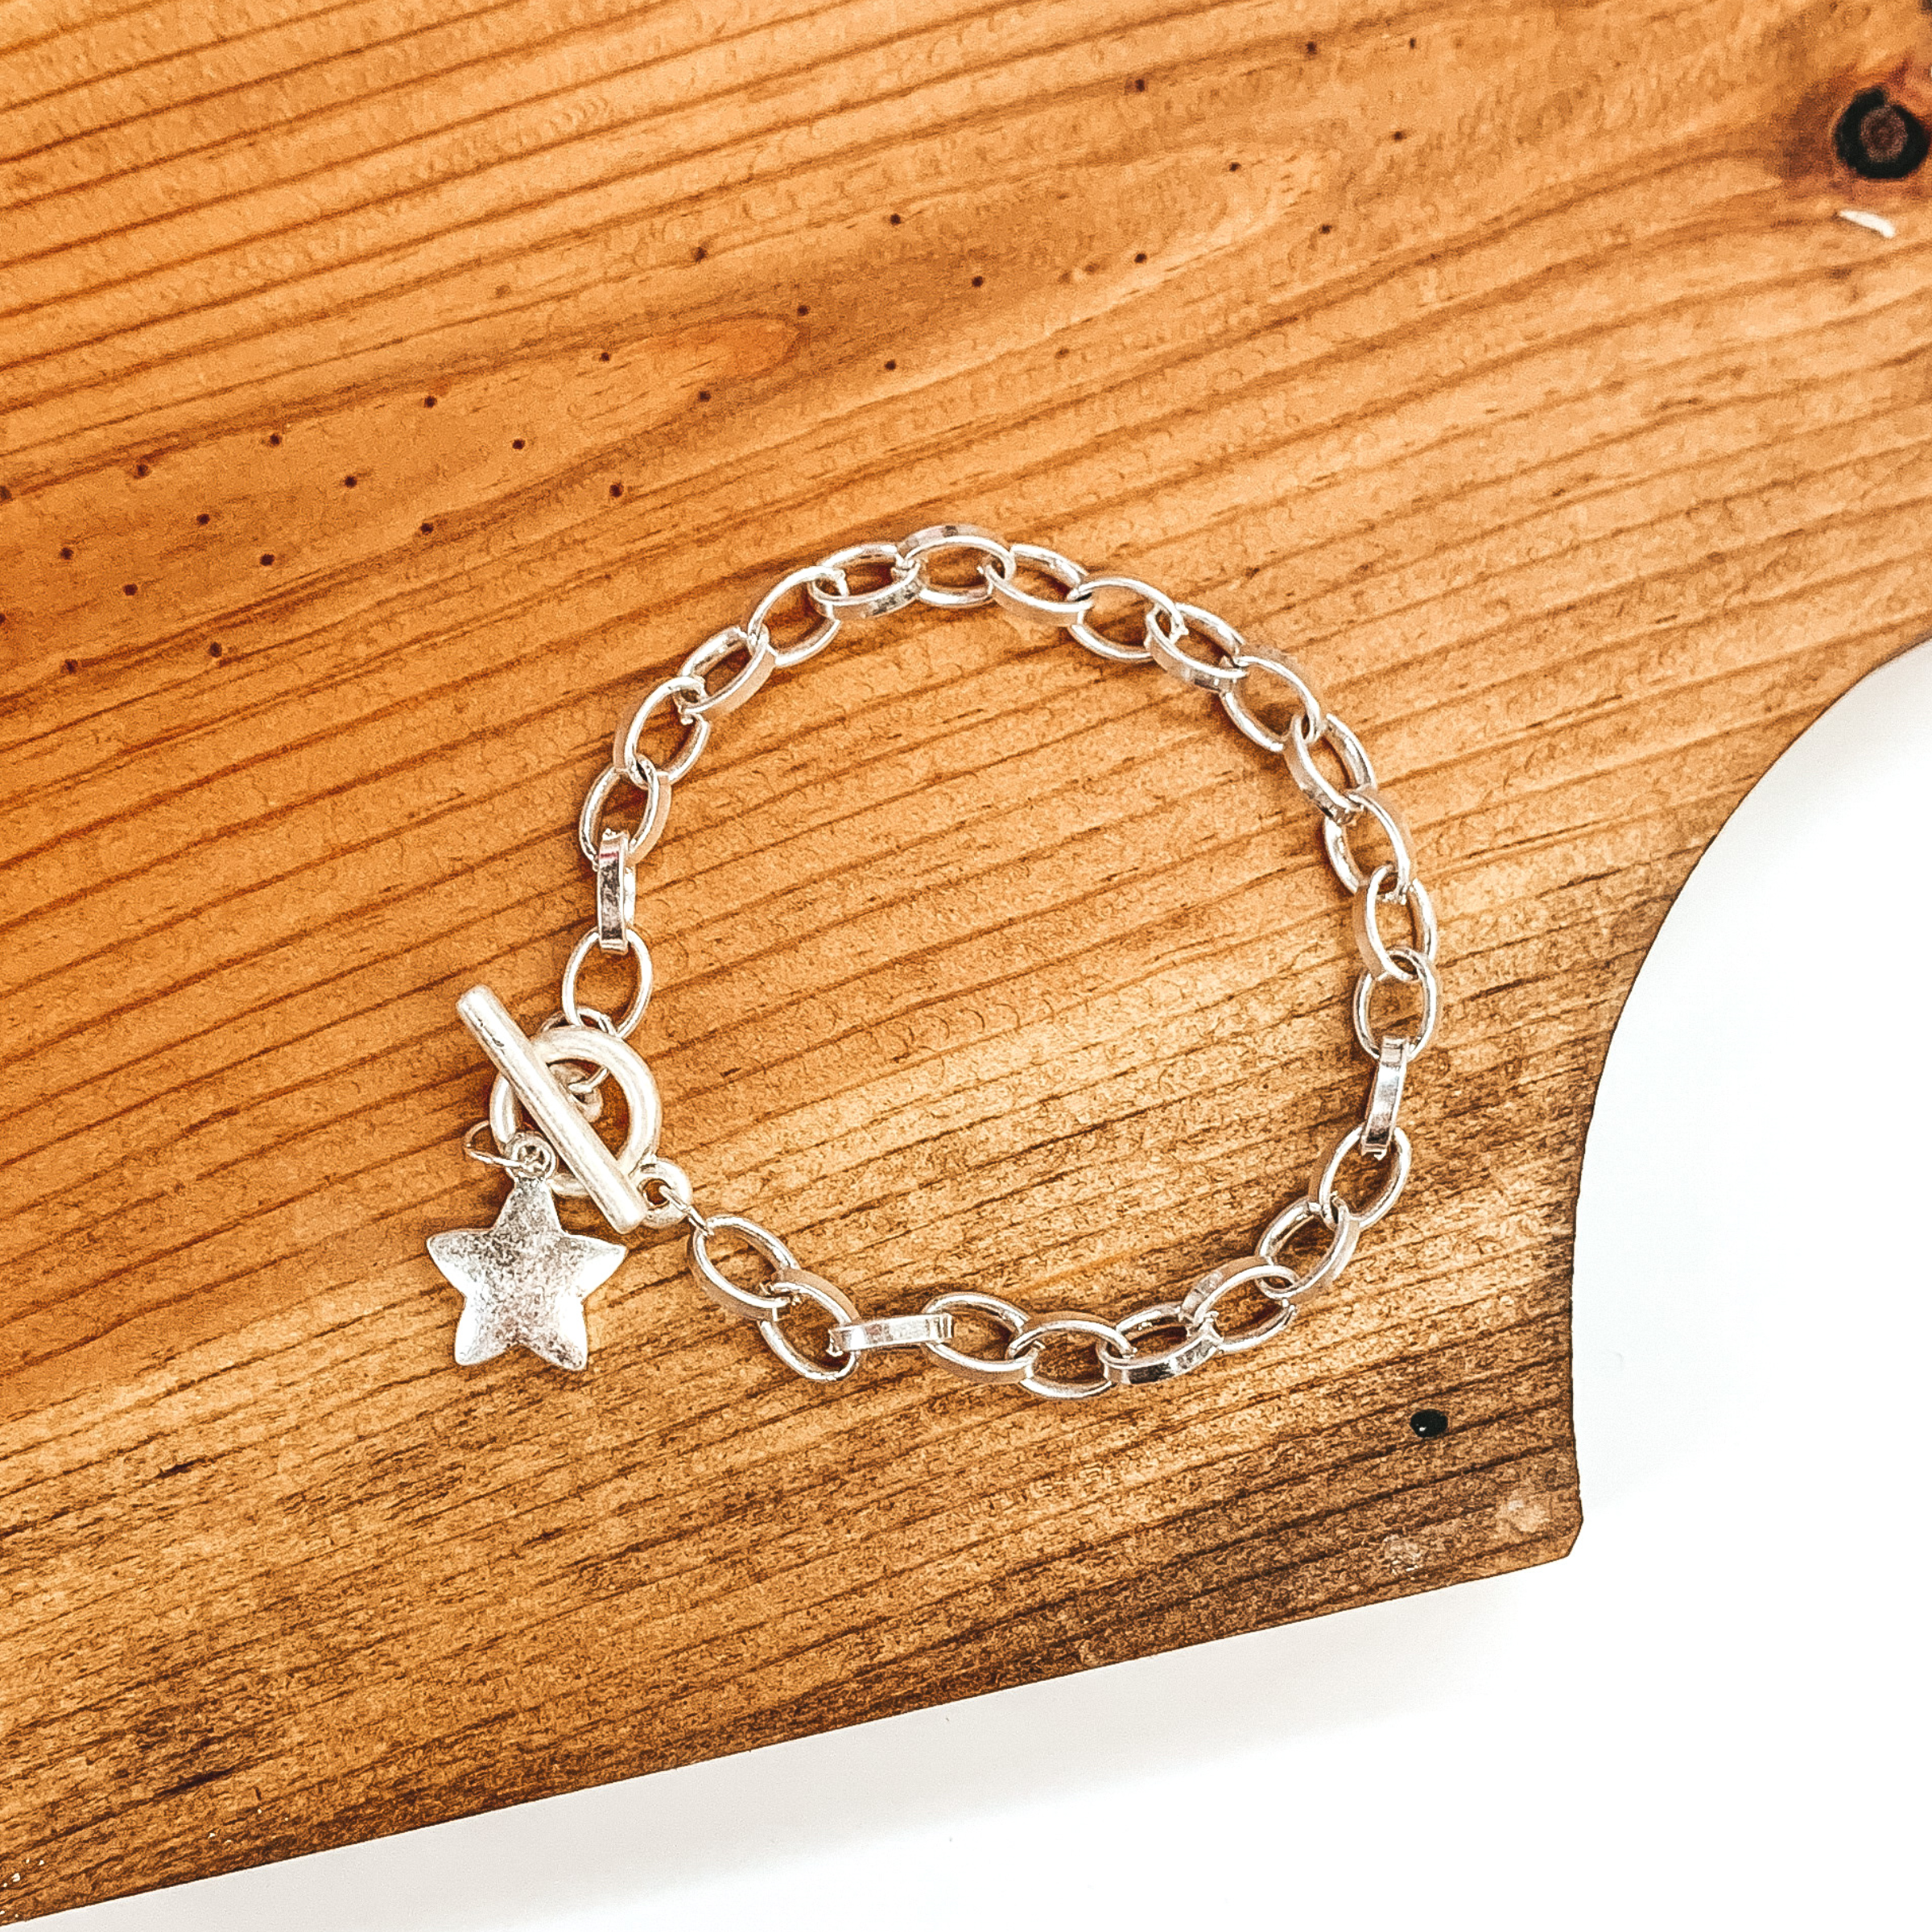 Silver oval chain linked bracelet with a toggle clasp and hanging silver star charm.  this bracelet is pictured laying on a dark brown piece of wood on a white background. 